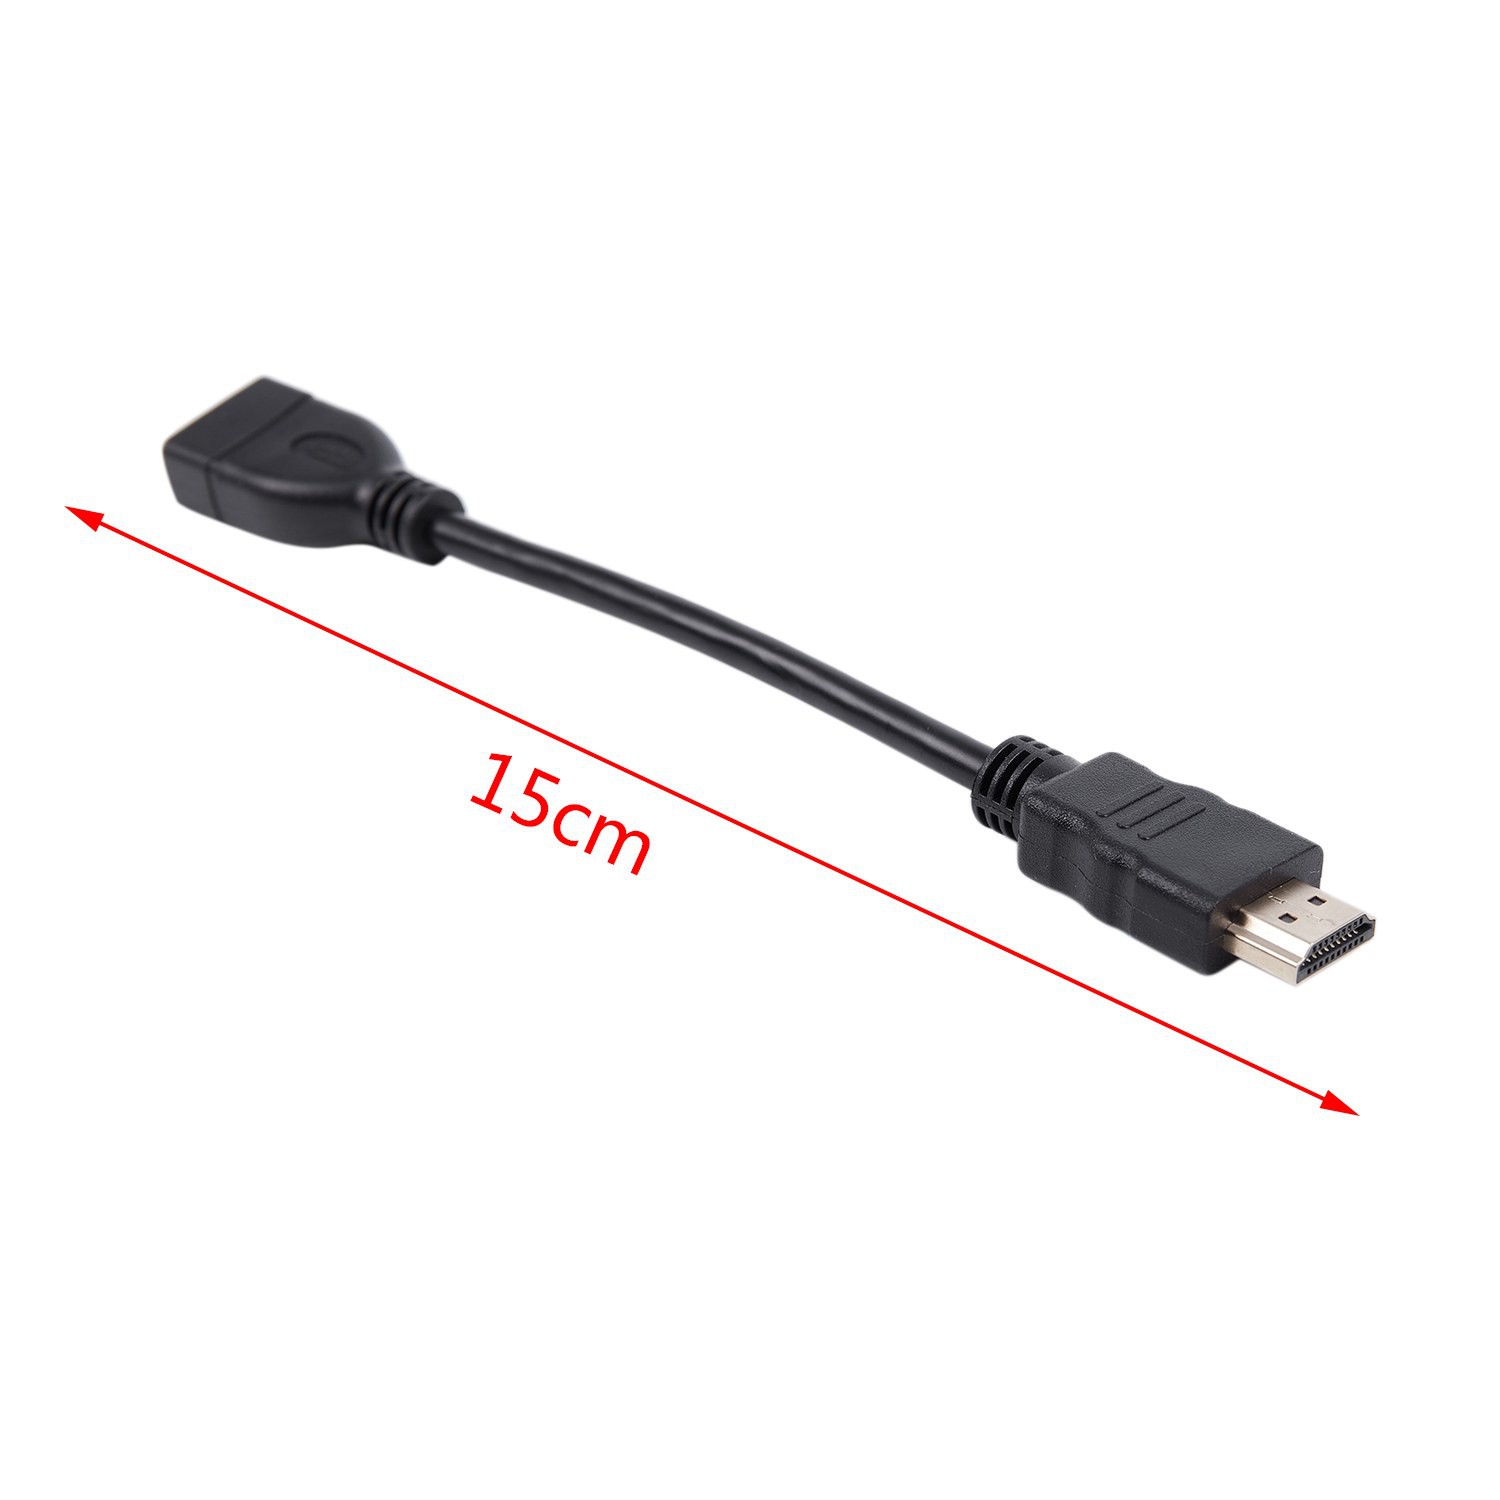 Hdmi Male To Female Extender Cable Short And Convenient For Google Chrome Cast, Fire Tv Stick, Roku Stick Connection To Tv